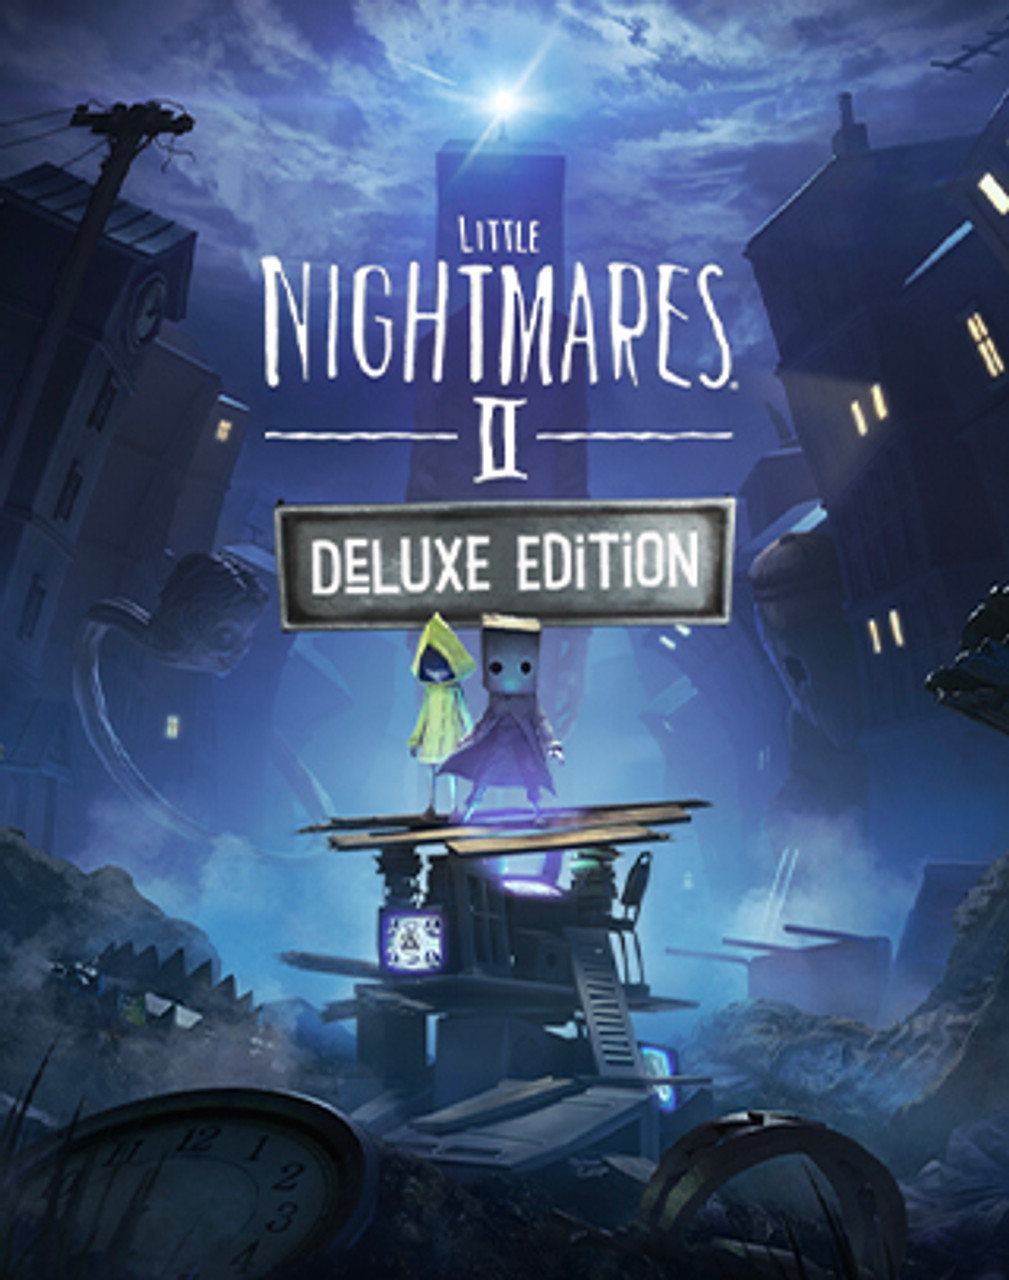 LITTLE NIGHTMARES - Deluxe Edition Namco Download] Store | [PC Bandai